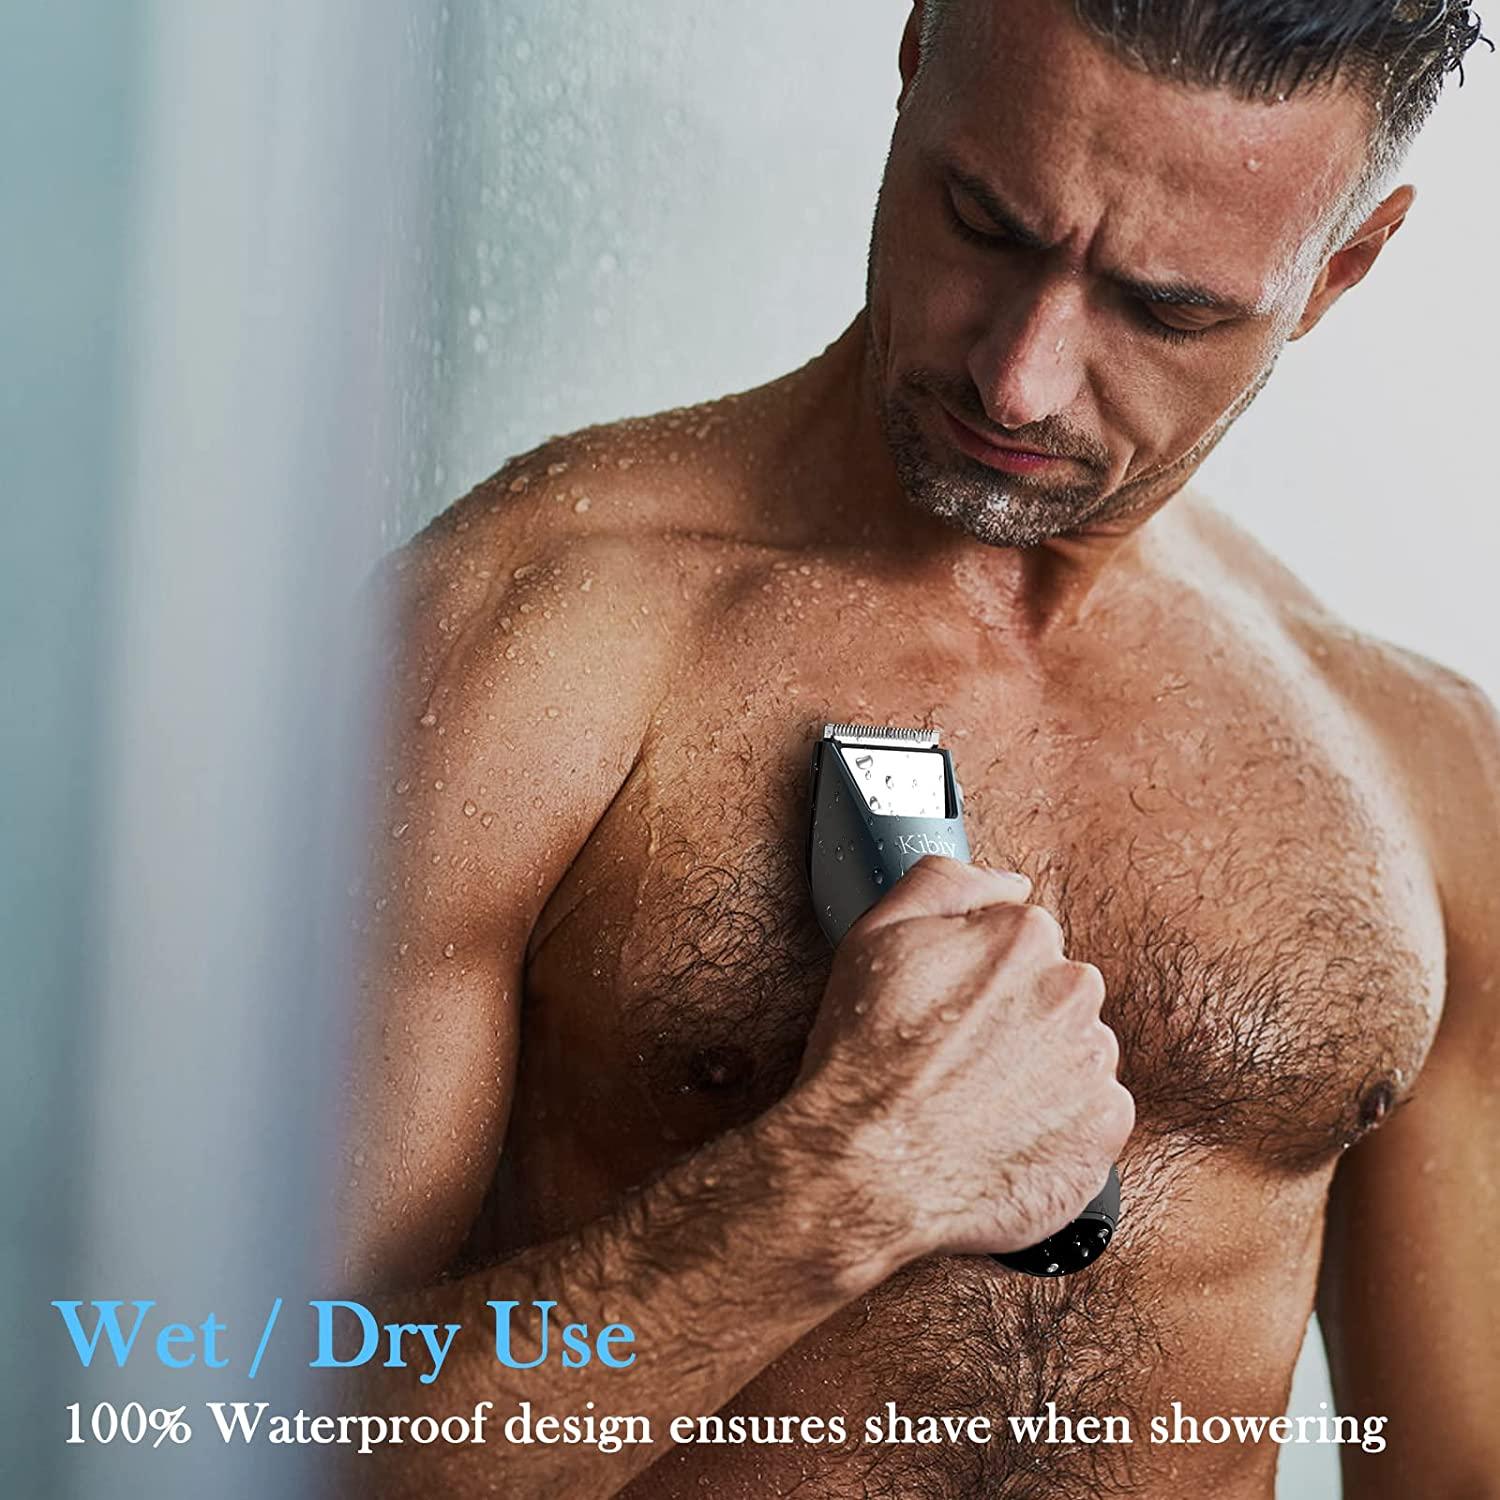 Body Hair Trimmer for Men - Electric Ball Shaver Razor for Pubic Groin Hair  Grooming with Built-in LED Light and Mirror, Ceramic Blade, No Pulls, No  Cuts, Waterproof Wet/ Dry Cordless Use